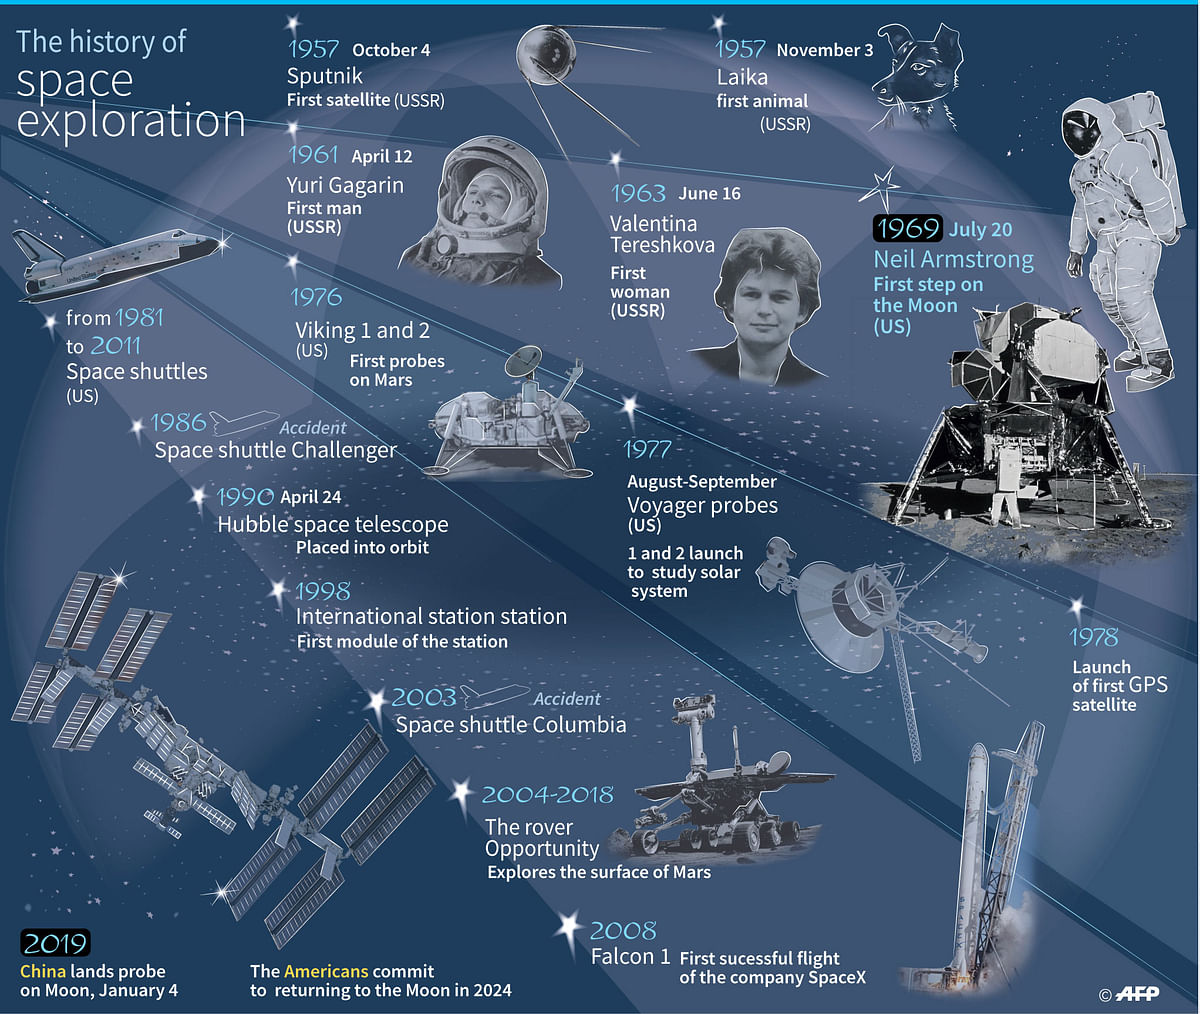 The history of space exploration, ahead of the 50 anniversary of the first human steps on the moon by Neil Armstrong on 20 July 1969. Photo: AFP